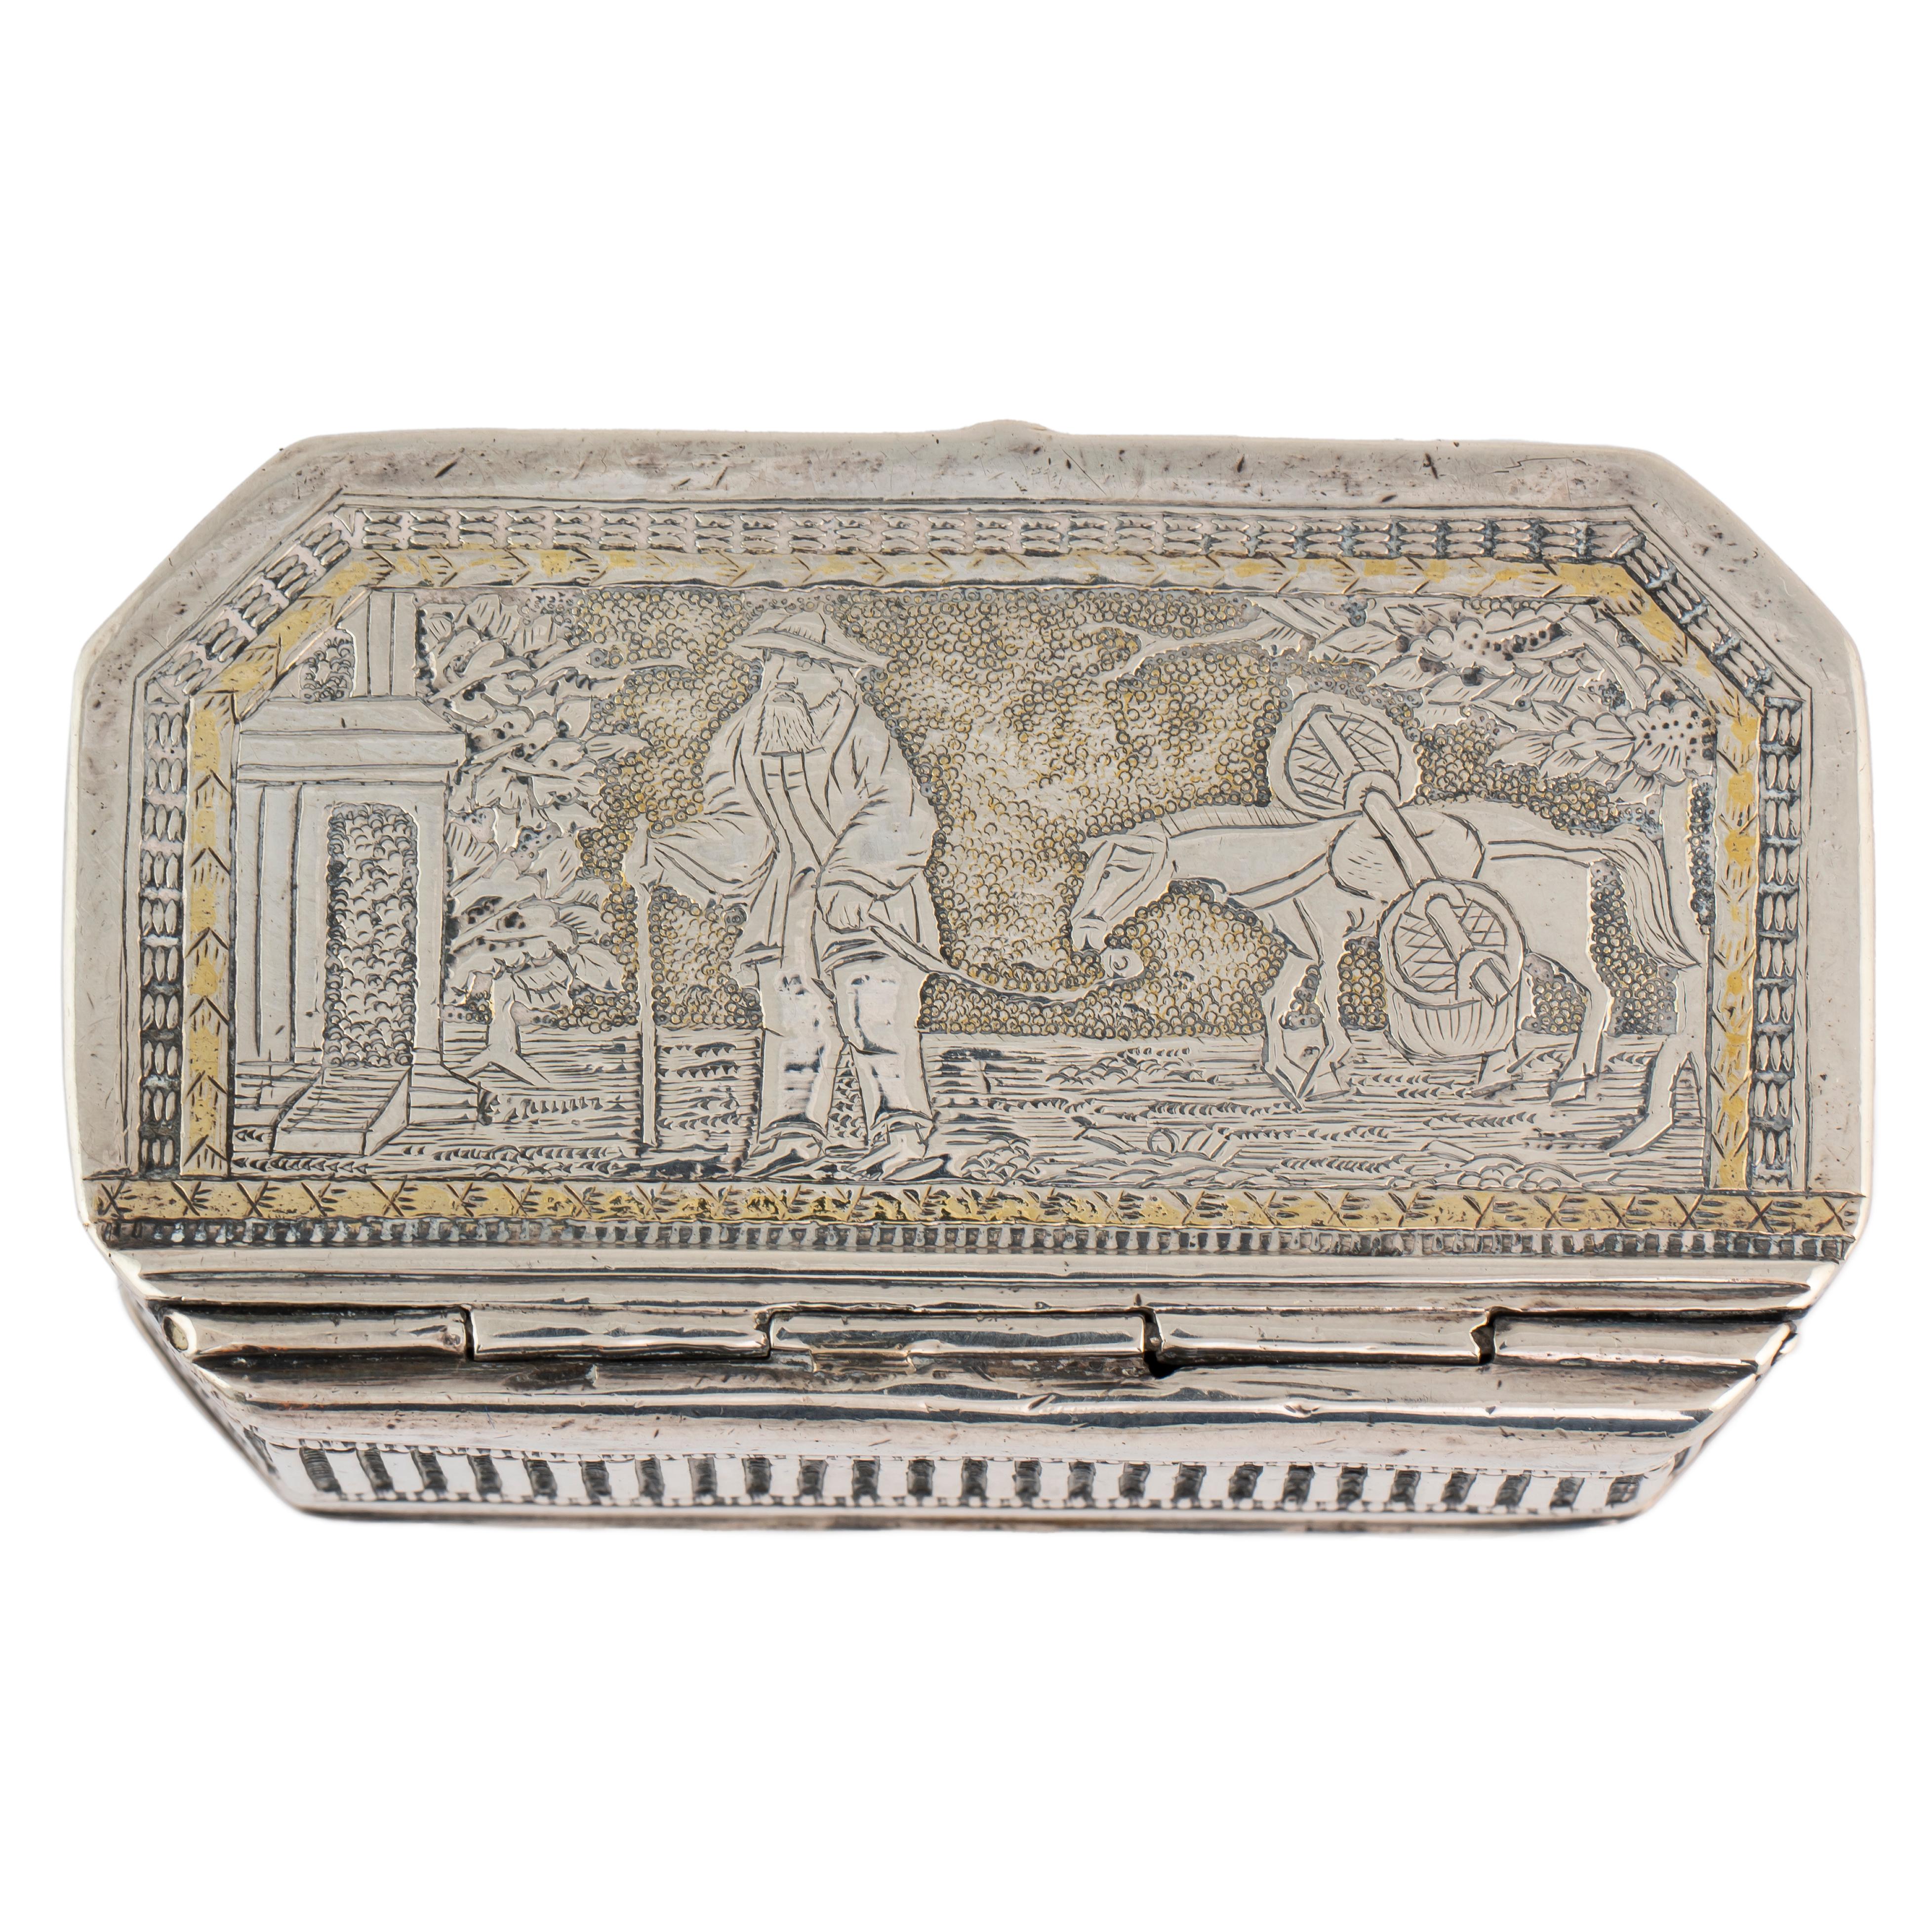 Chinese Export Silver Trinket Box with Chinese Scene, Late 19th-Early 20th Century For Sale